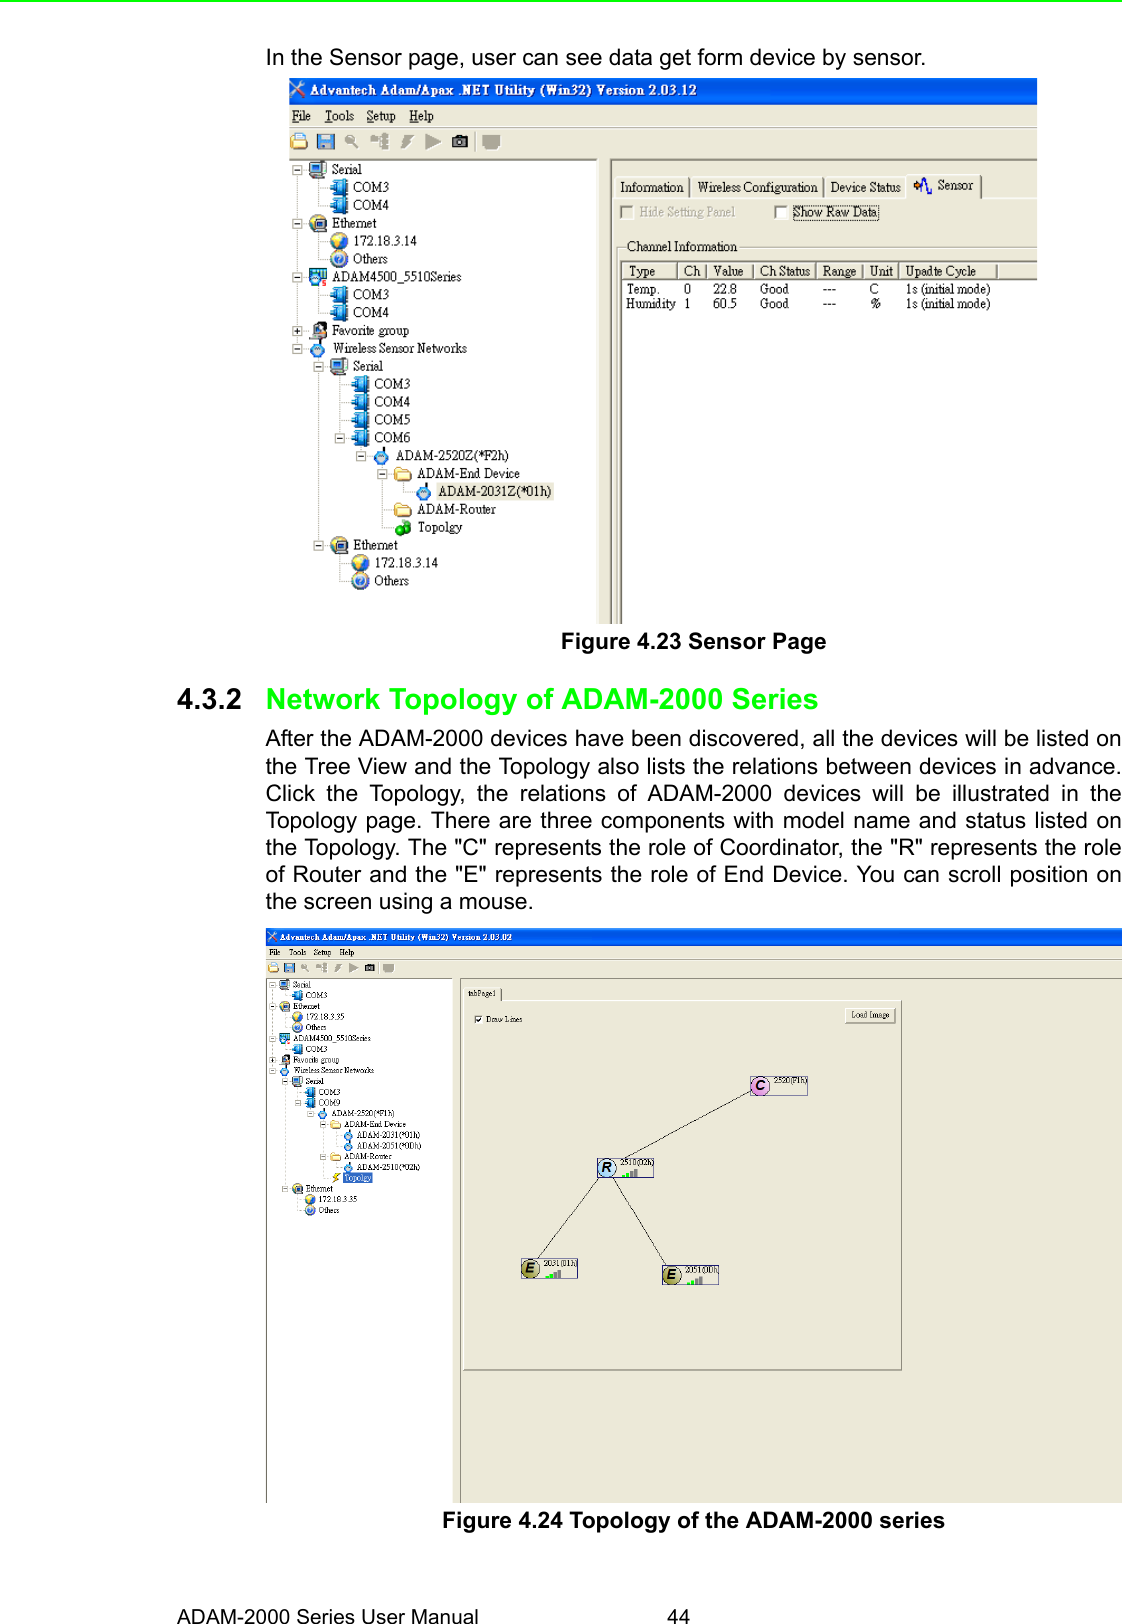 ADAM-2000 Series User Manual 44In the Sensor page, user can see data get form device by sensor.Figure 4.23 Sensor Page4.3.2 Network Topology of ADAM-2000 SeriesAfter the ADAM-2000 devices have been discovered, all the devices will be listed onthe Tree View and the Topology also lists the relations between devices in advance.Click the Topology, the relations of ADAM-2000 devices will be illustrated in theTopology page. There are three components with model name and status listed onthe Topology. The &quot;C&quot; represents the role of Coordinator, the &quot;R&quot; represents the roleof Router and the &quot;E&quot; represents the role of End Device. You can scroll position onthe screen using a mouse.Figure 4.24 Topology of the ADAM-2000 series